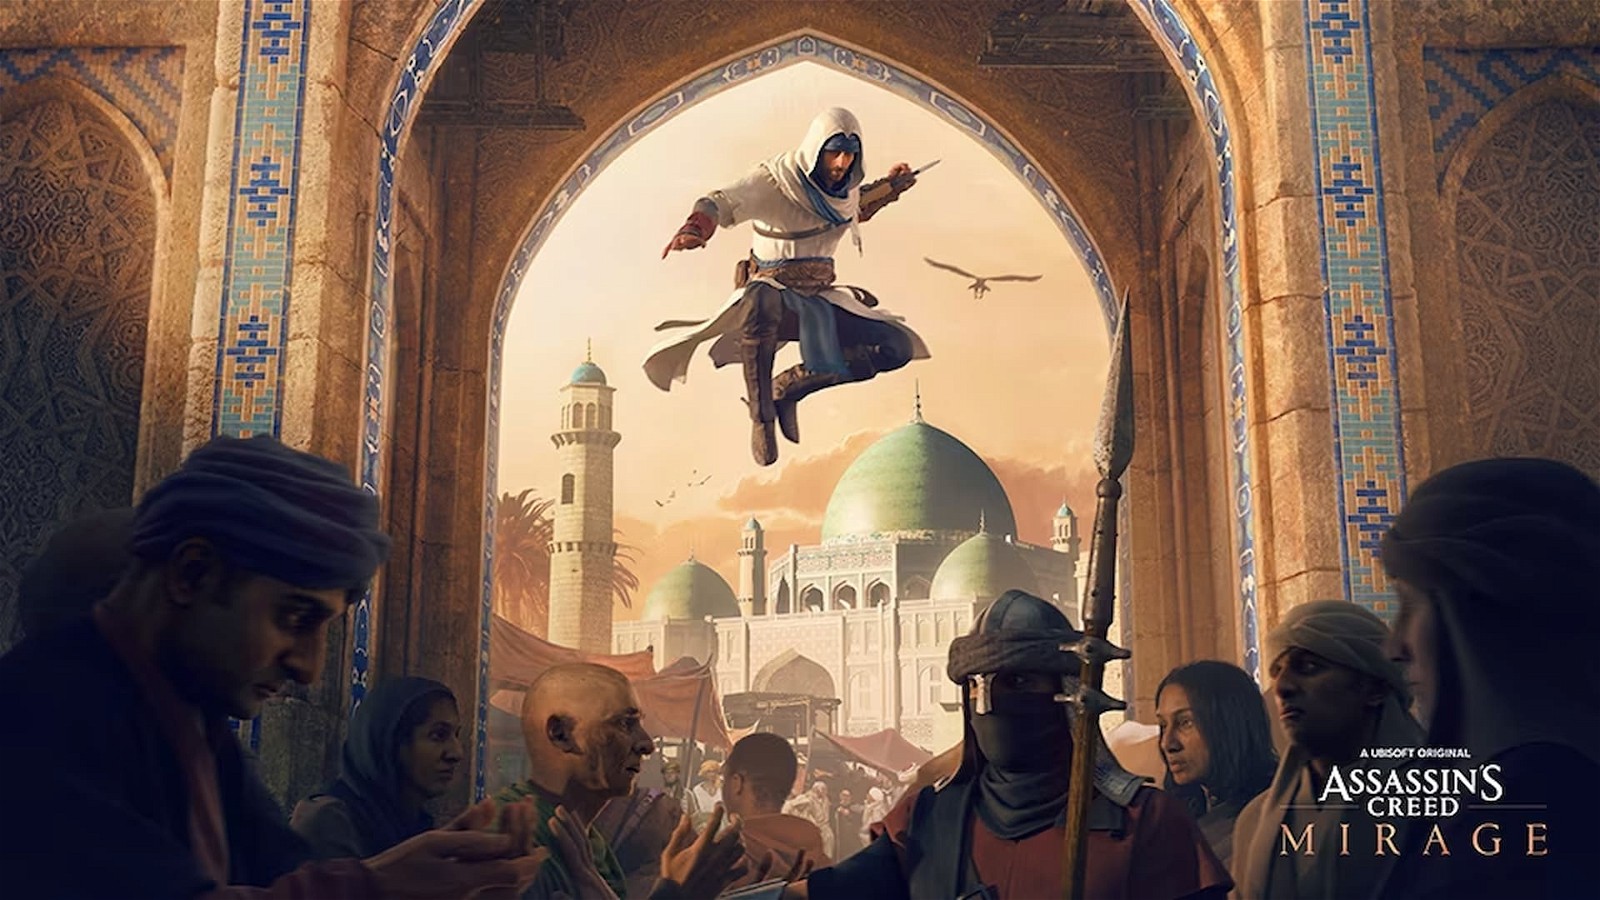 Basim has previously been seen in Assassin’s Creed Valhalla